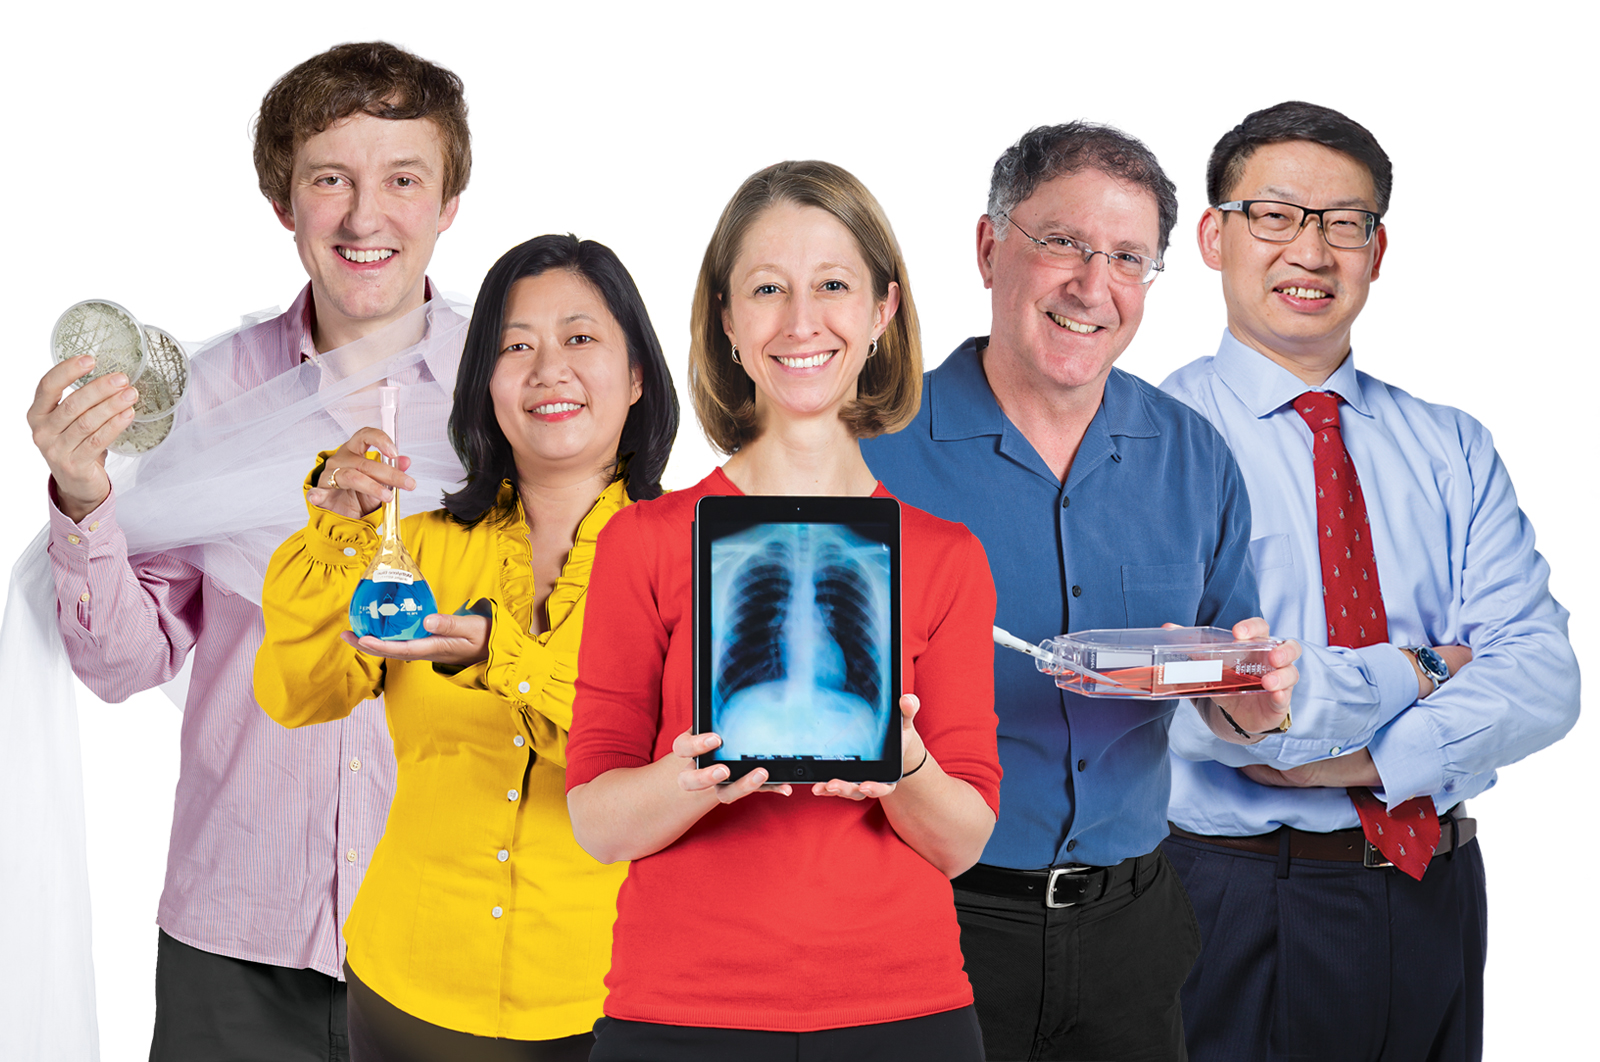 Five University of Maryland researchers who are working to fight human disease: (L-R) Raymond St. Leger, Kan Cao, Margaret Scull, Jonathan Dinman and Lai-Xi Wang. They are brightly-dressed and each is holding something from their lab, such as pipettes, petri dishes and materials samples.